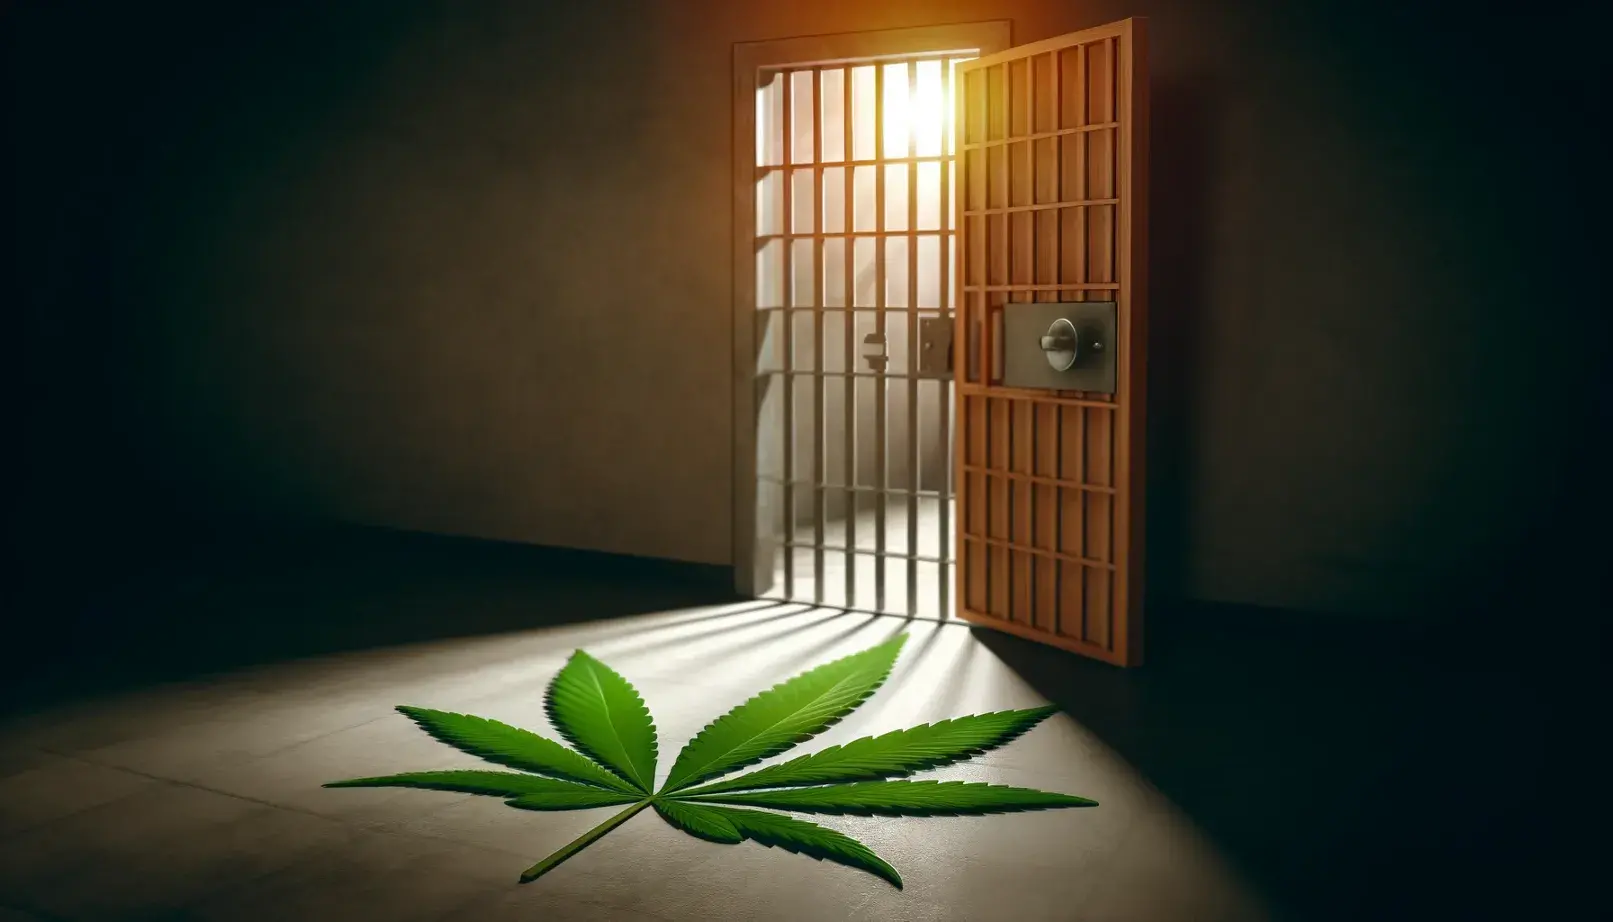 Symbolic change in cannabis laws with an empty prison cell and a cannabis leaf on the floor.